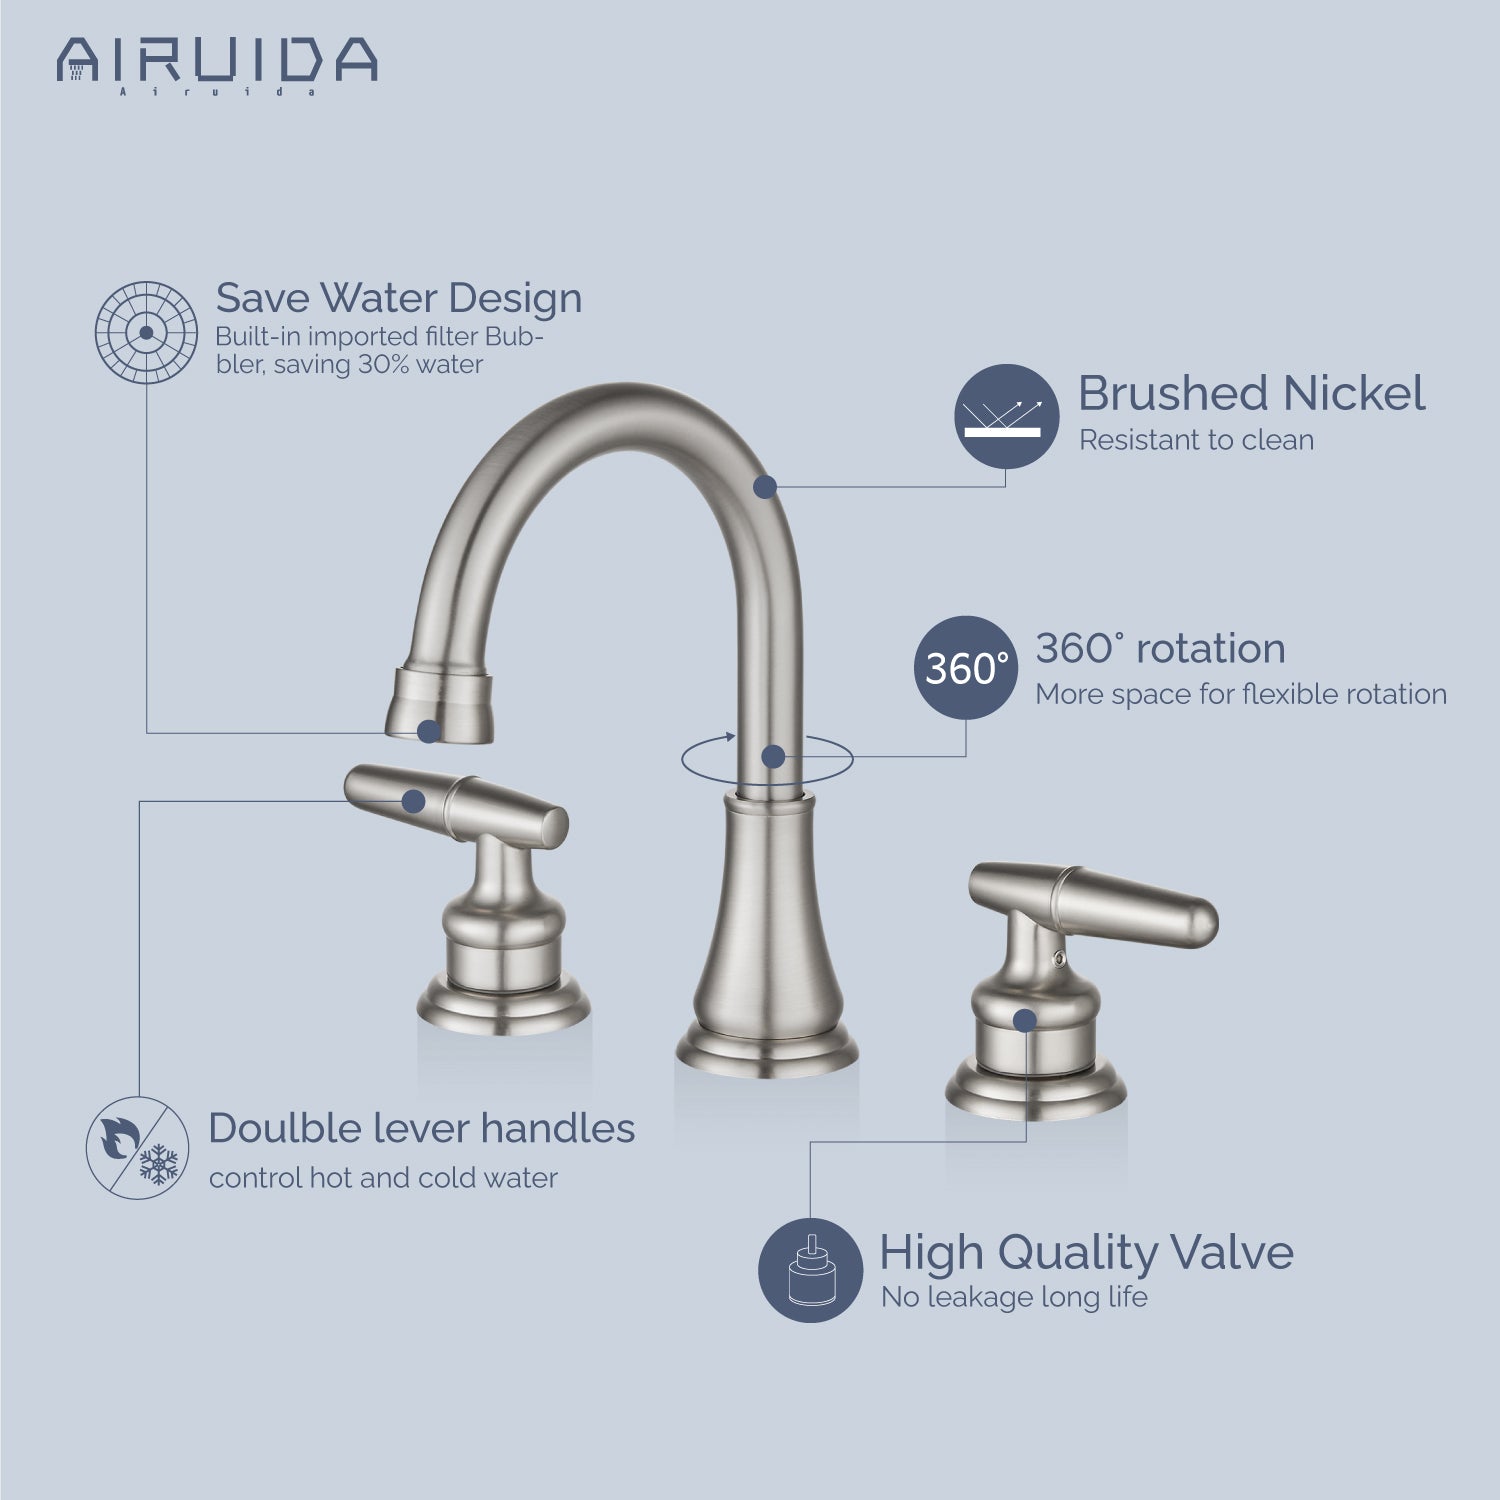 Airuida 8 Inch Widespread Bathroom Sink Faucet 2 Handles 3 Holes 360 Degree Swivel Spout Stainless Steel Lavatory Vanity Faucets Bathroom Faucets